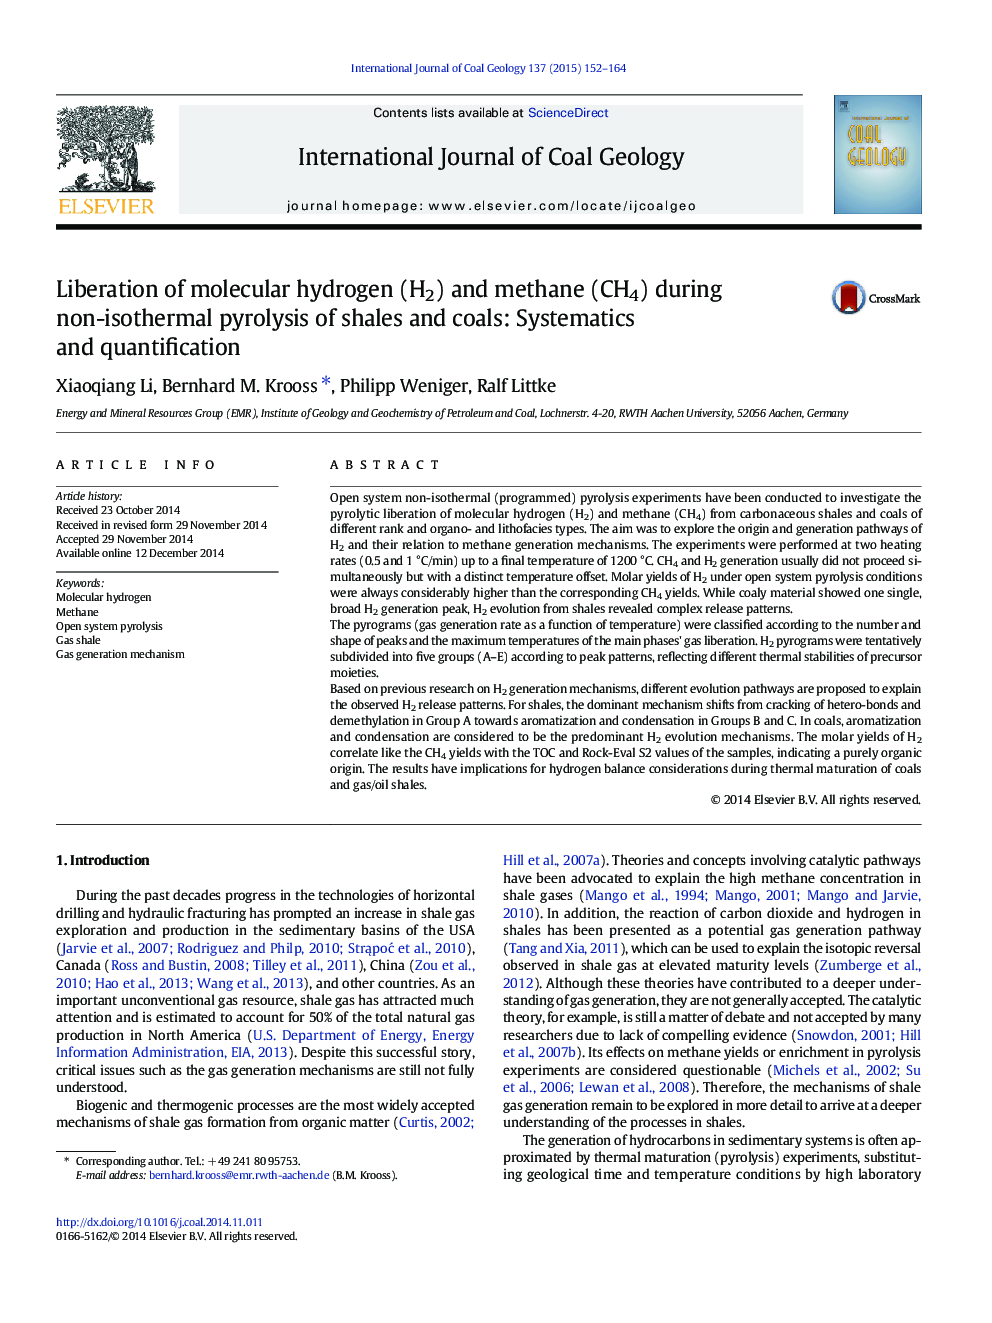 Liberation of molecular hydrogen (H2) and methane (CH4) during non-isothermal pyrolysis of shales and coals: Systematics and quantification